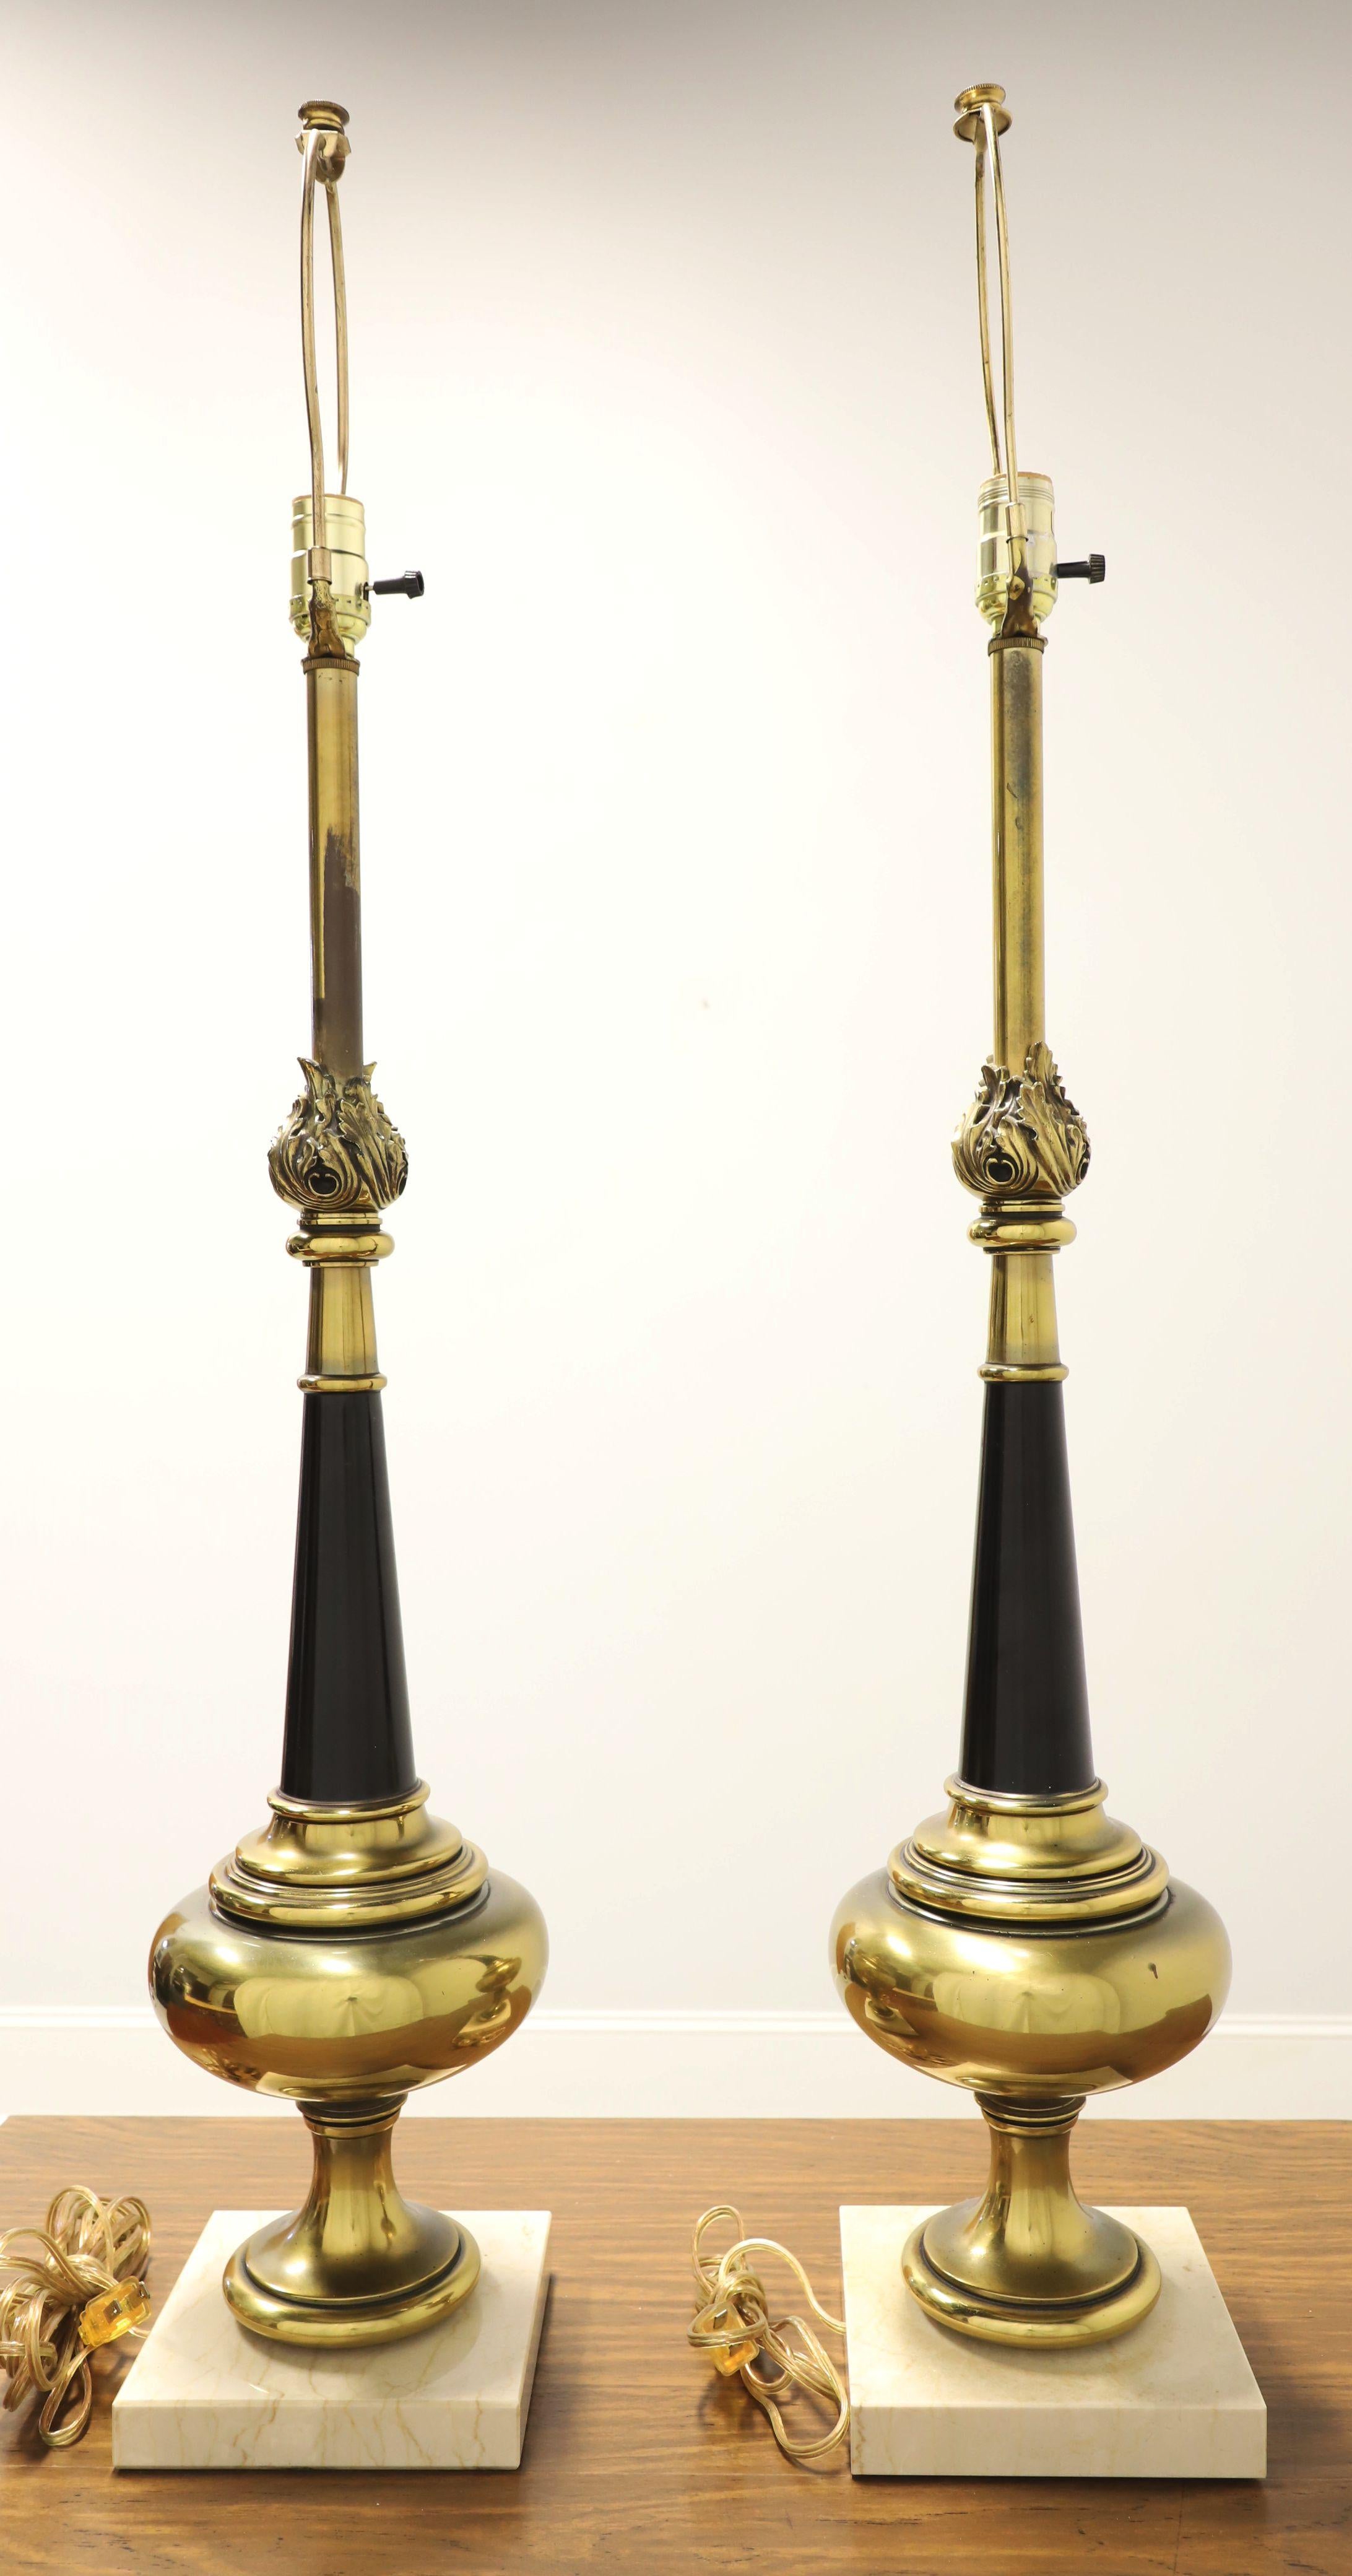 A pair of Hollywood Regency style table lamps, unbranded. Made of solid brass with an urn like shape, black painted center for accent, tall neck with decoratively molded top, and on an Italian genuine Carrara marble base. Has a removable metal harp